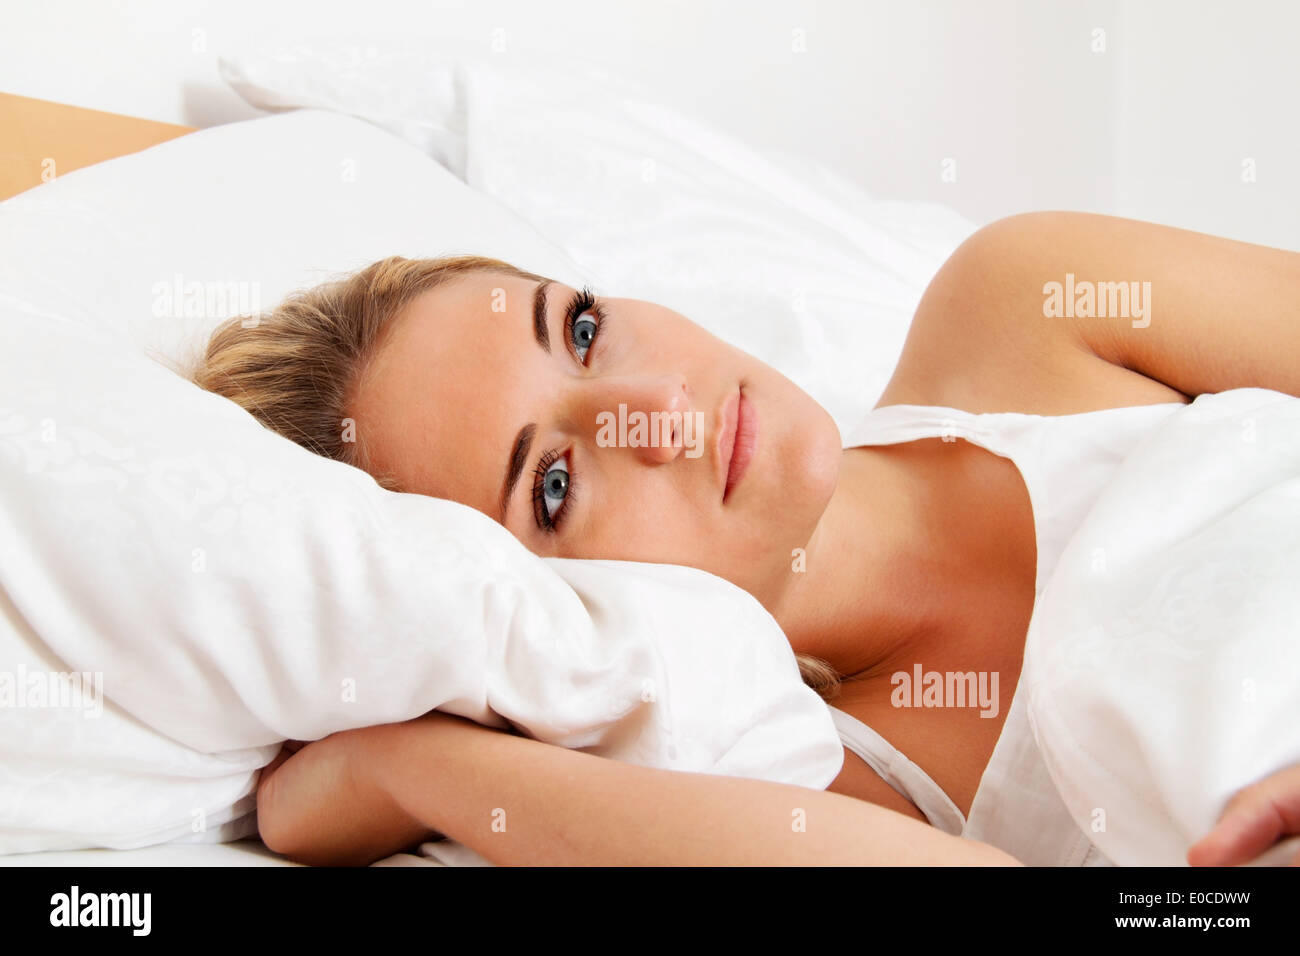 A young woman lies awake in the bed Stock Photo